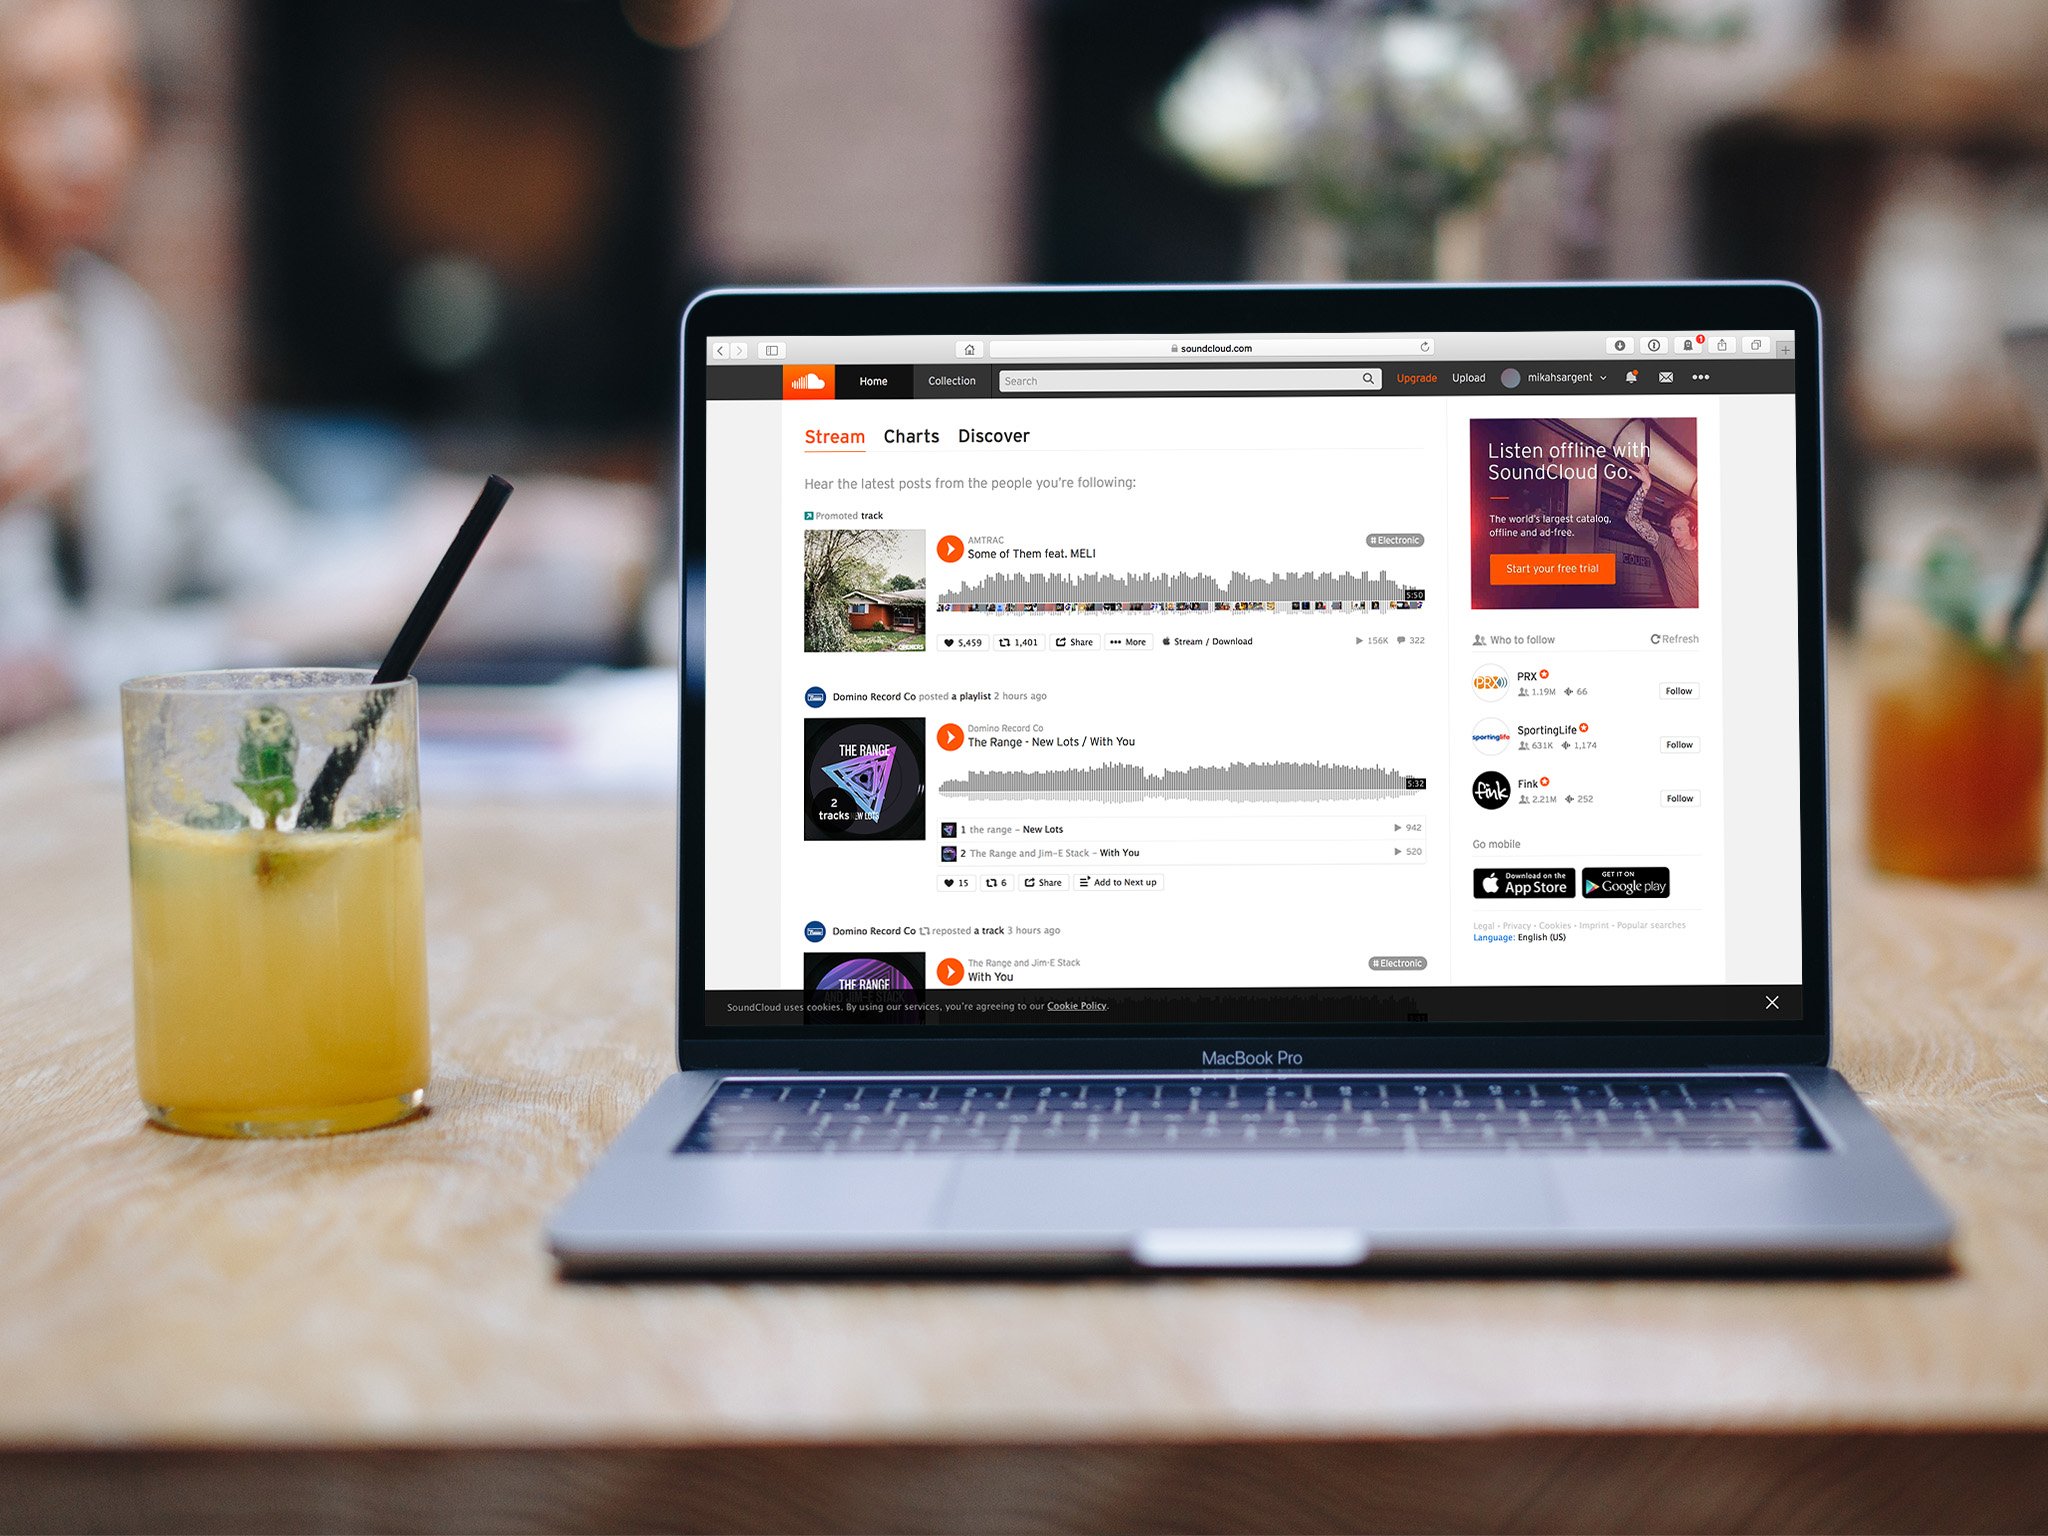 How To Get On The Soundcloud Charts